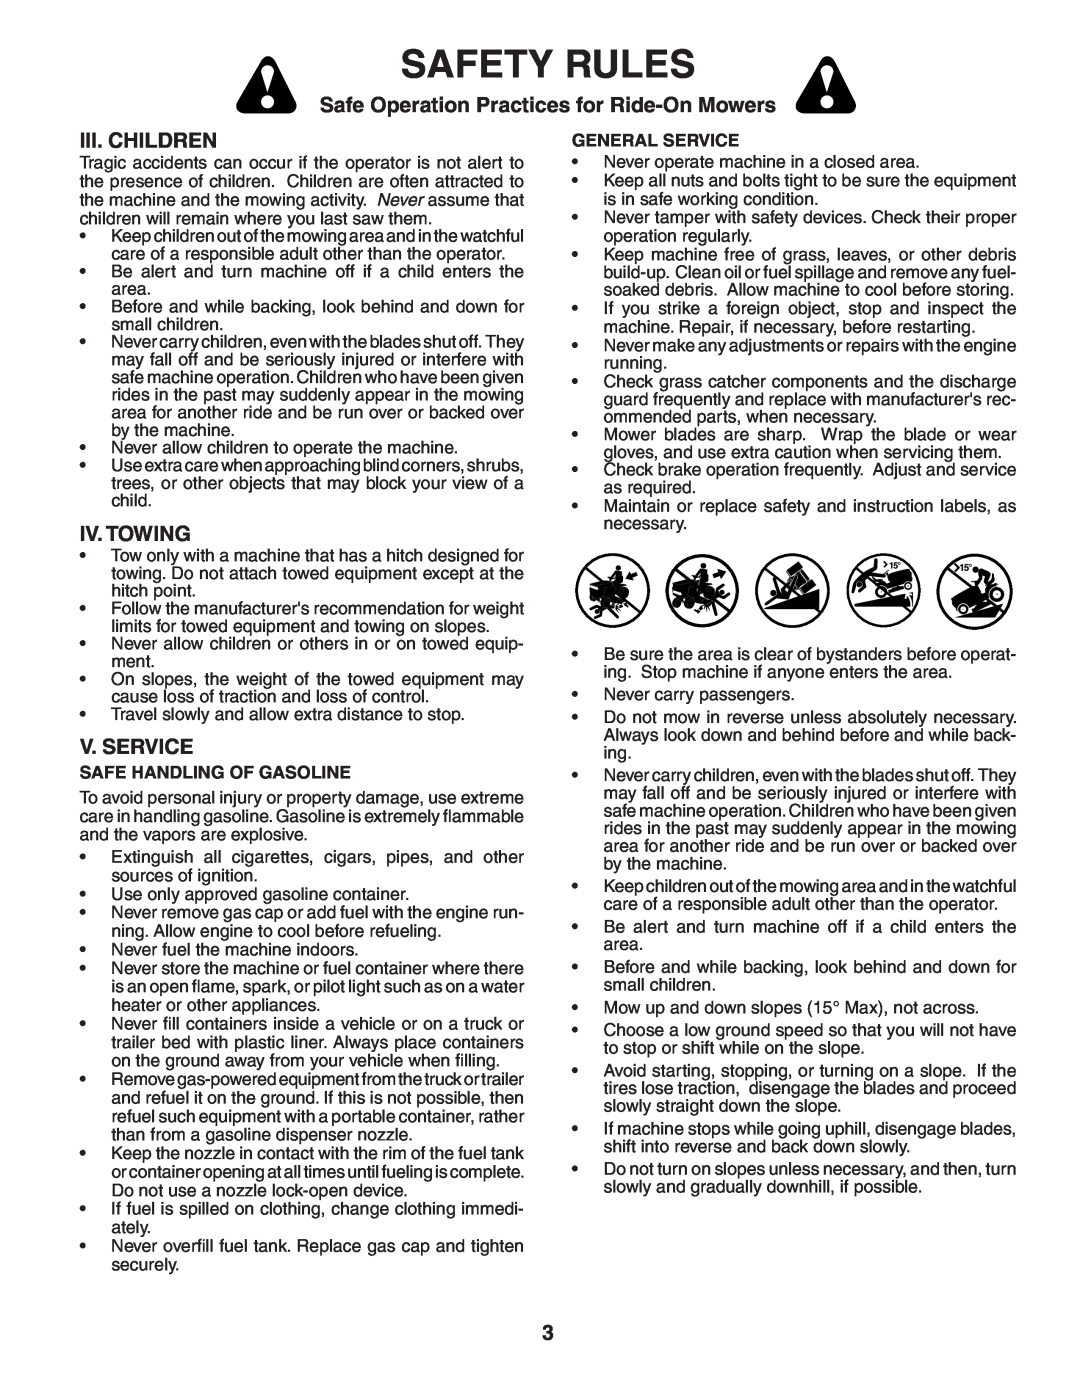 Murray MB1842LT manual Iii. Children, Iv. Towing, V. Service, Safety Rules, Safe Operation Practices for Ride-On Mowers 